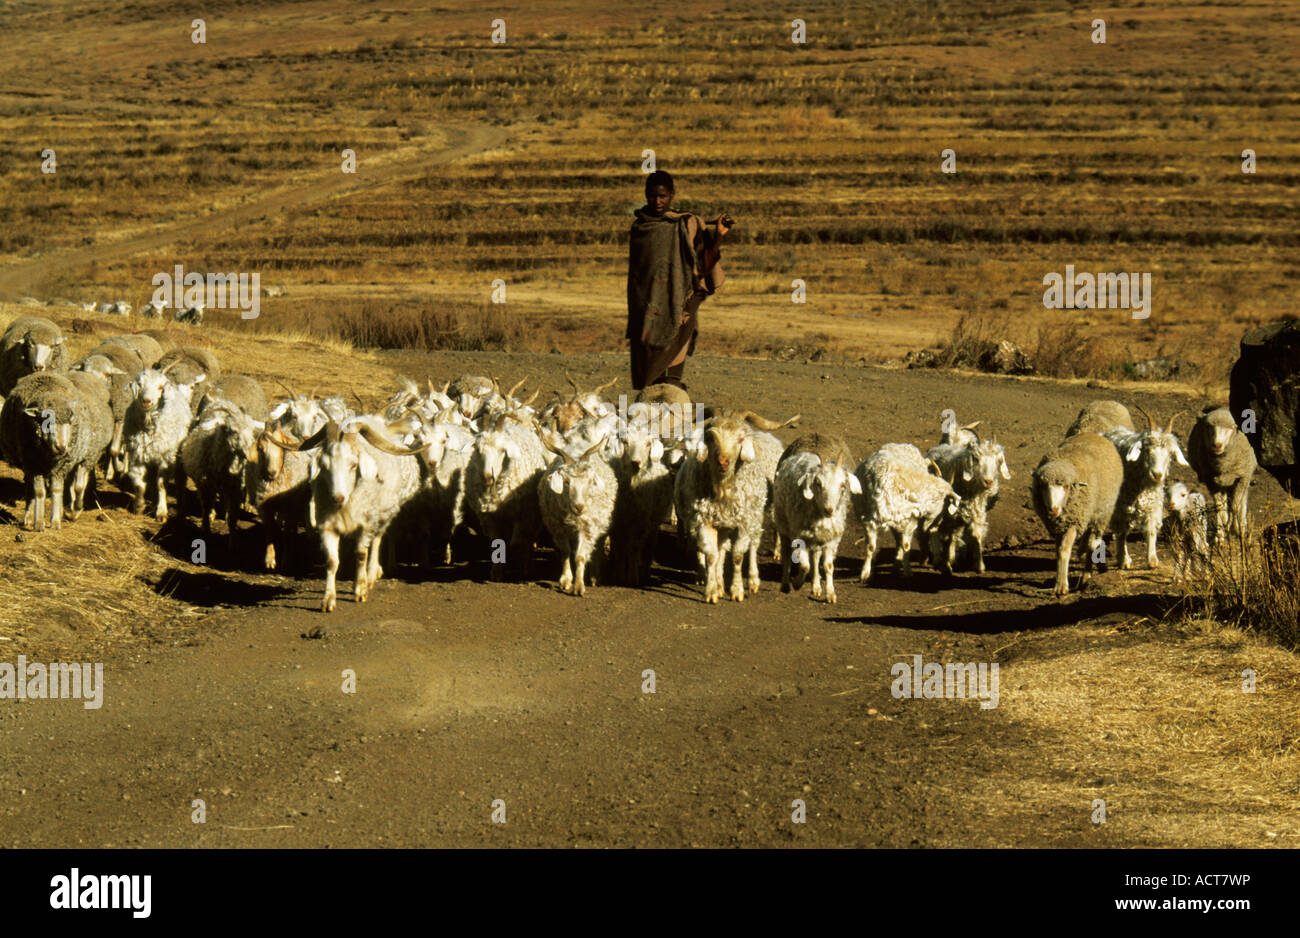 Head on view of shepherd leading his flock down a dusty road in a dry and arid environment Lesotho Stock Photo